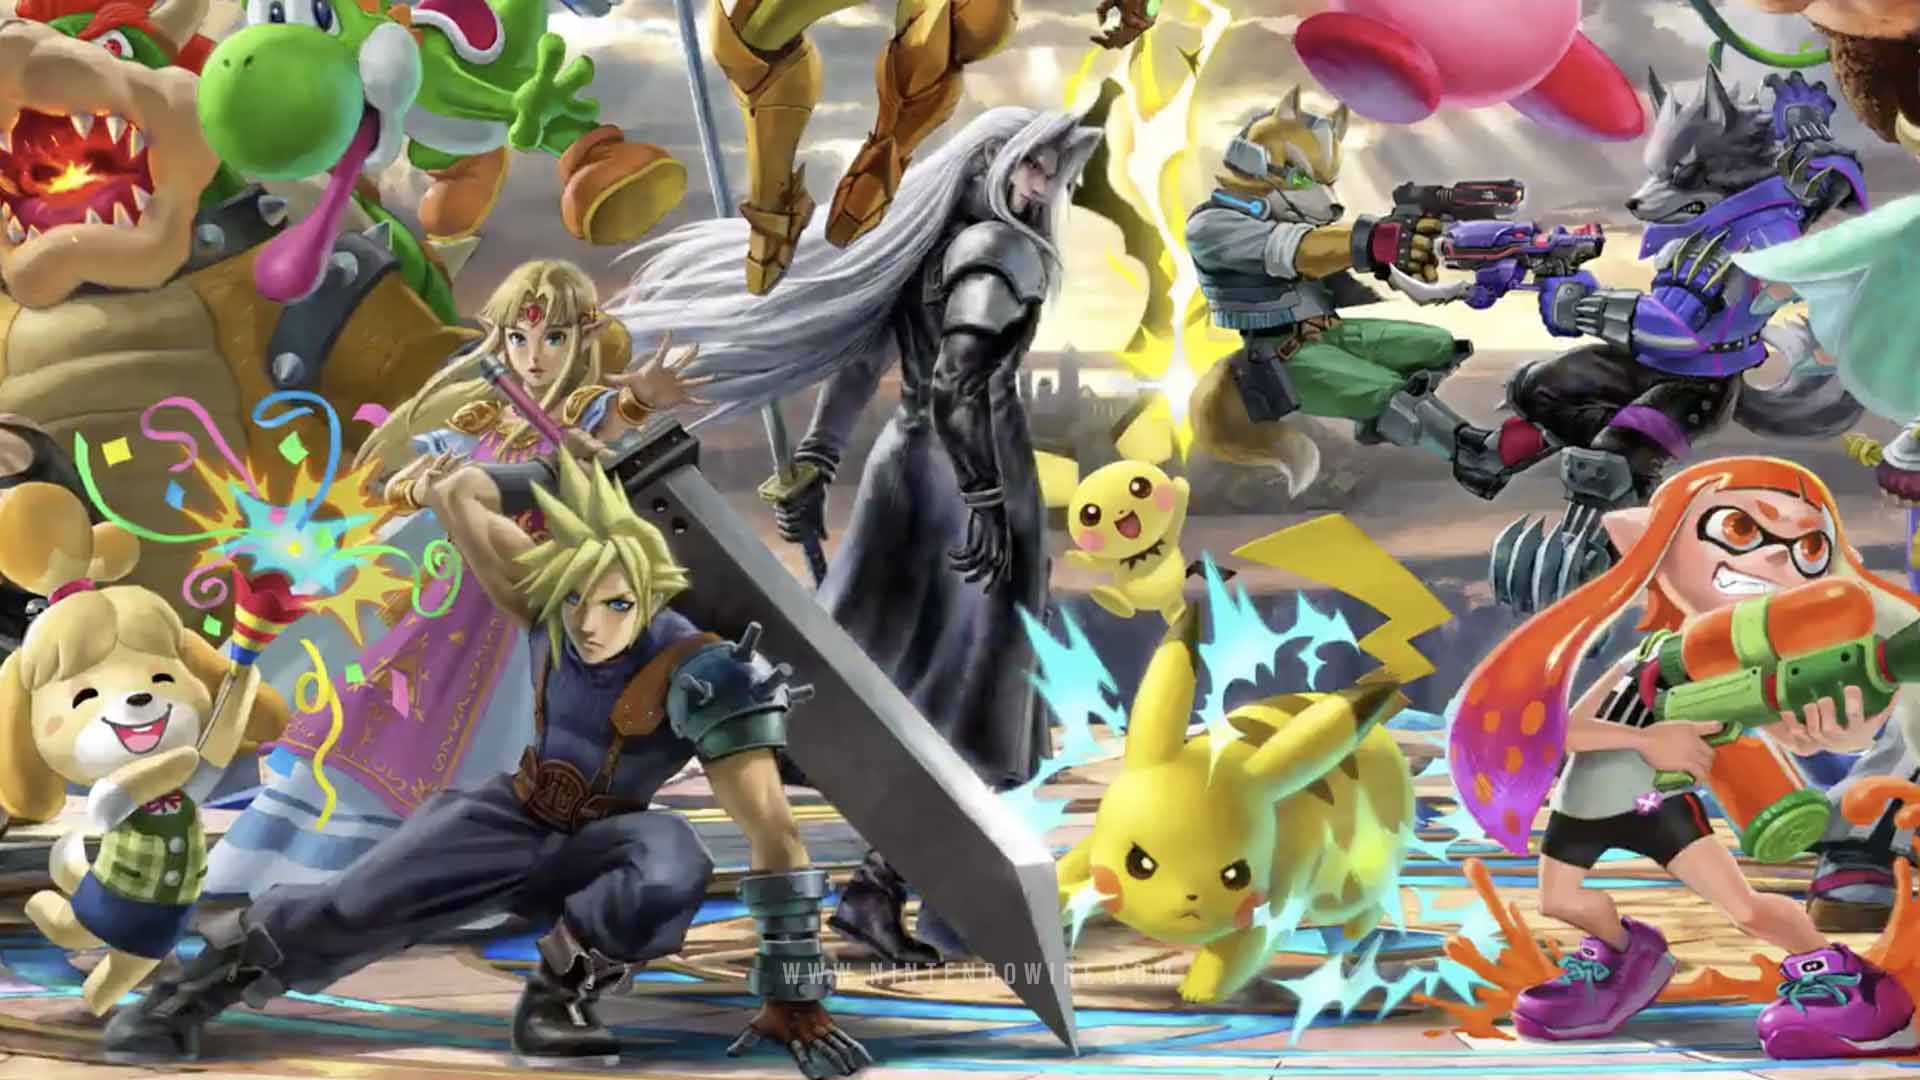 Ultimate updates character banner with Sephiroth - Nintendo Wire.